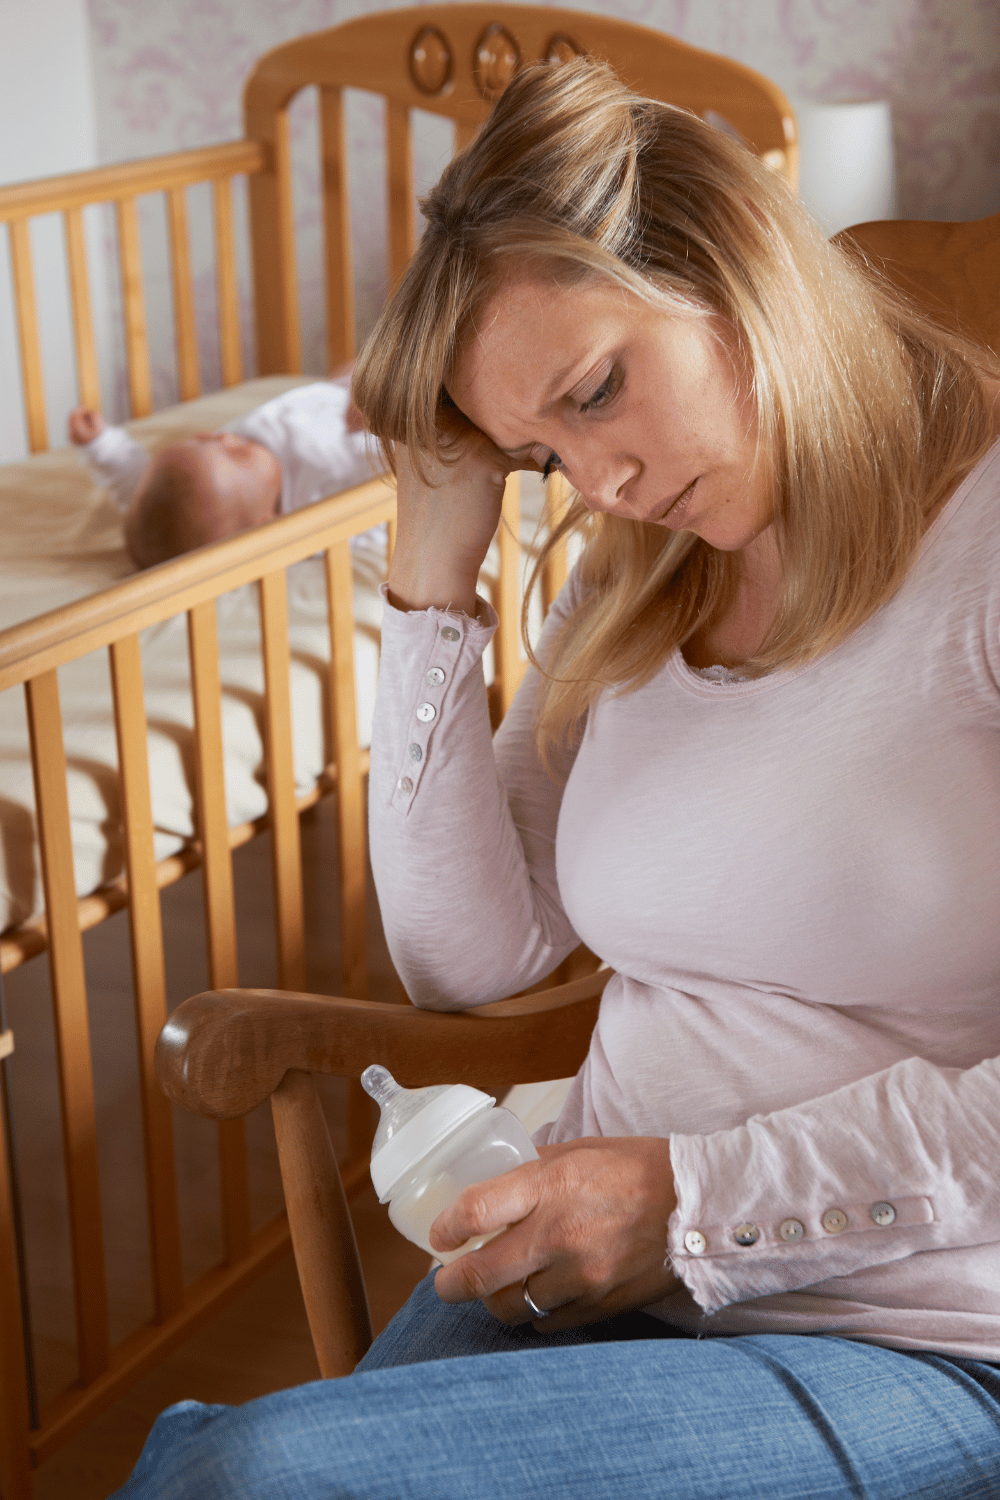 Postpartum Depression in mothers: A holistic guide to symptoms and recovery